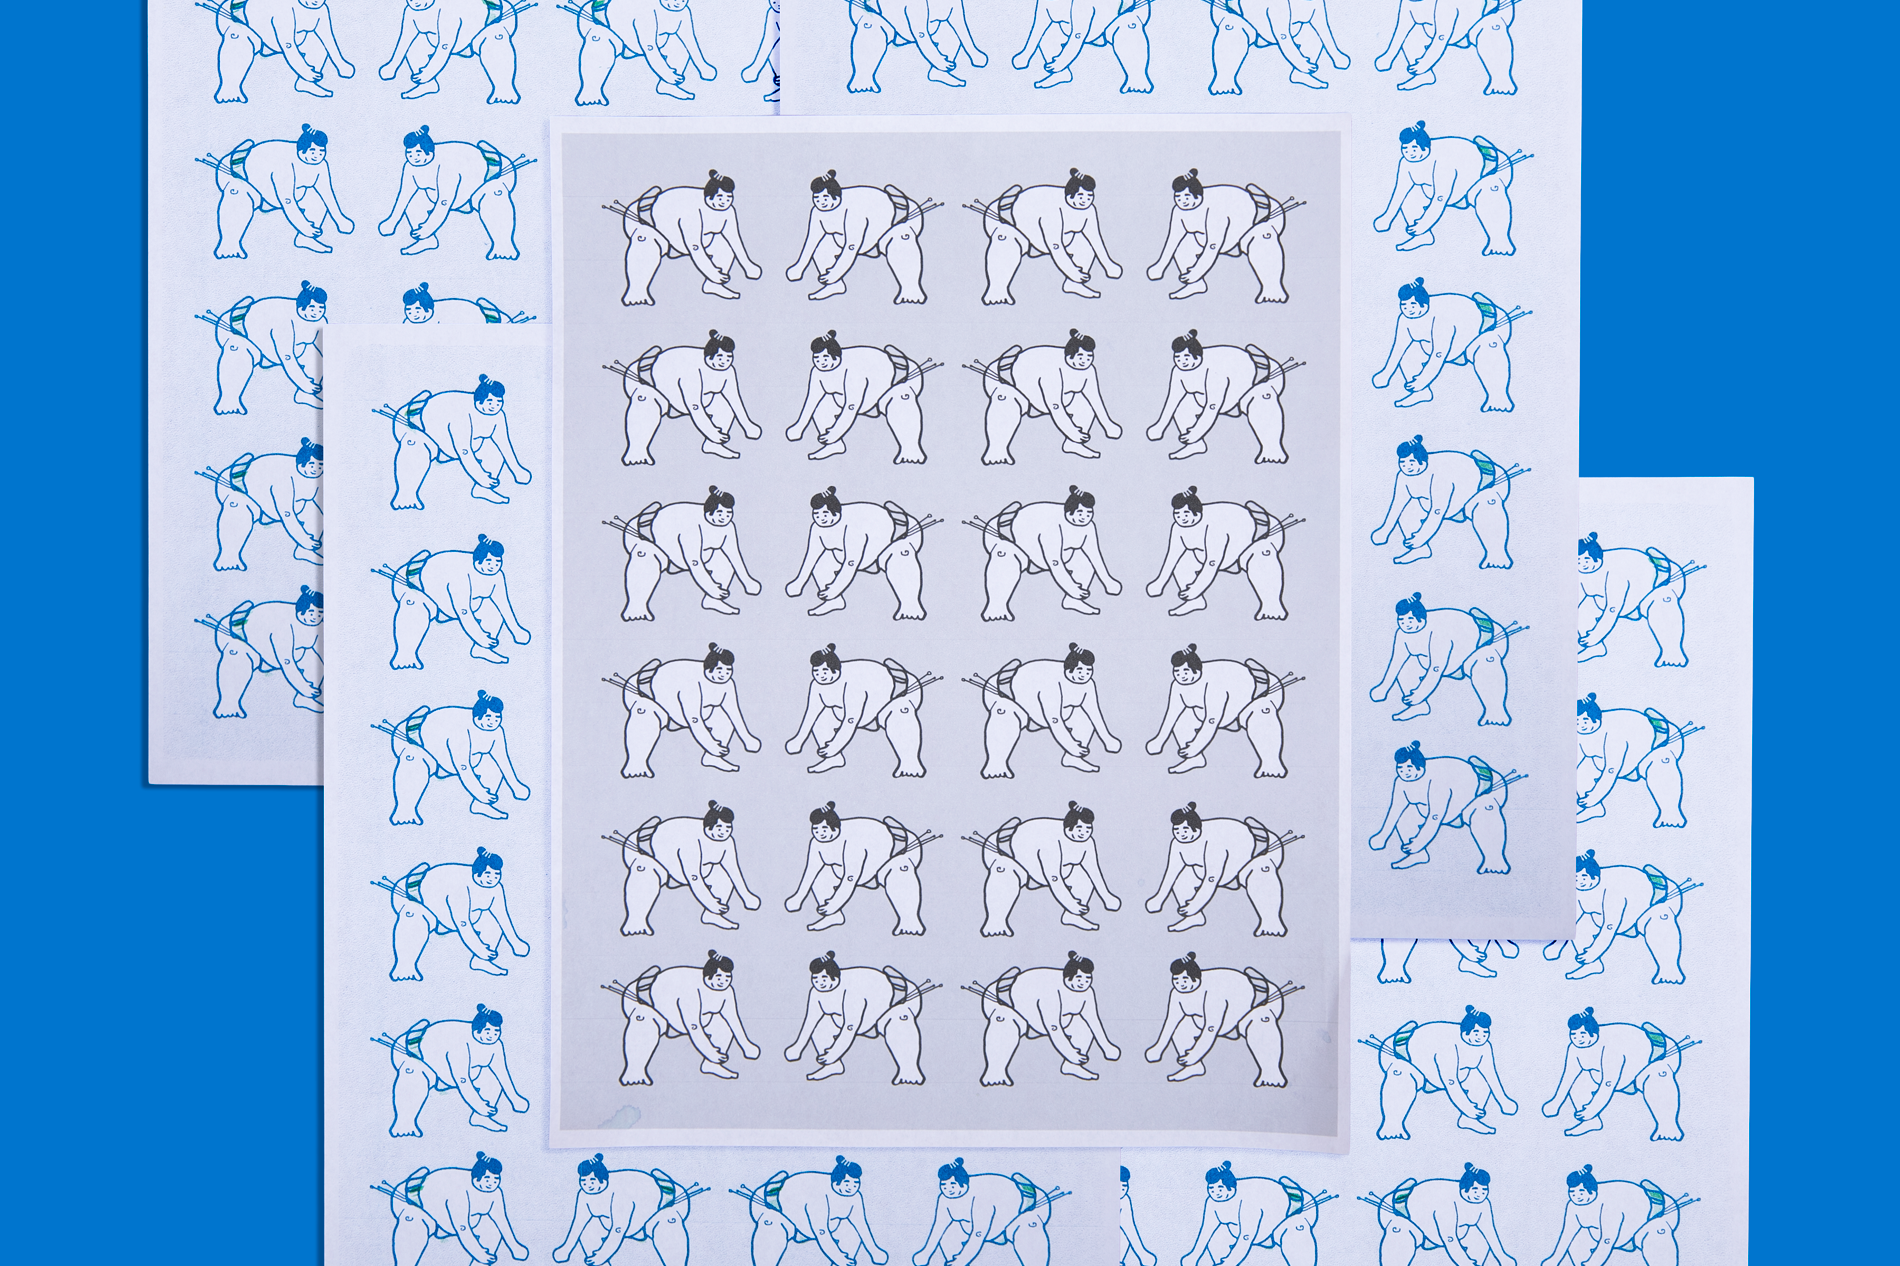 Risograph prints arranged on top of one another on a blue background